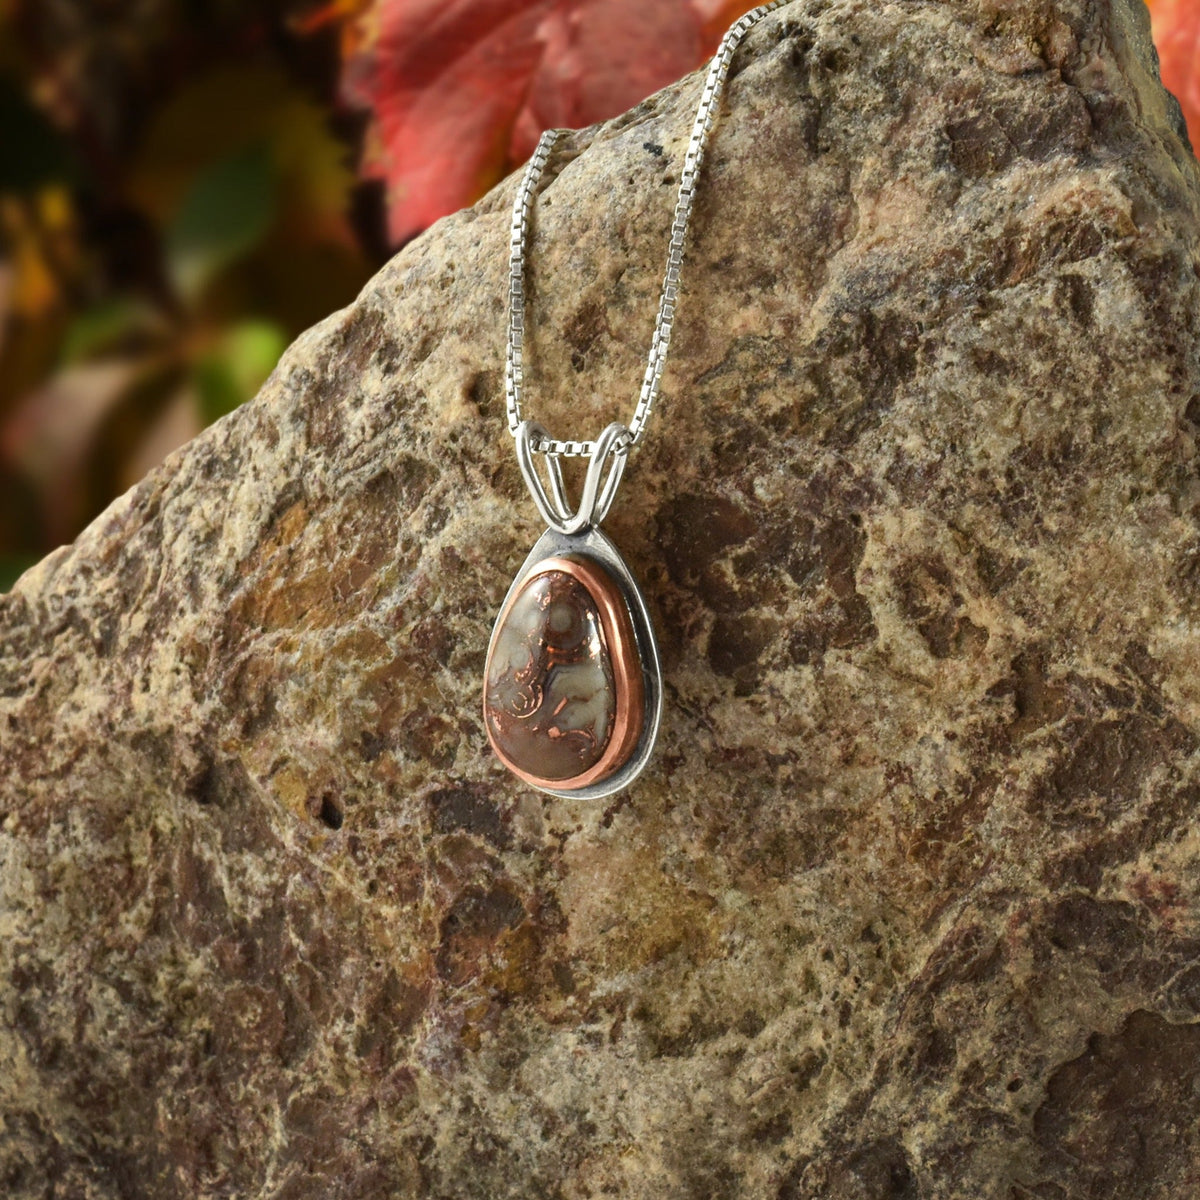 Copper Set Lake Superior Copper Agate Drop Pendant No. 4 - Mixed Metal Pendant   6654 - handmade by Beth Millner Jewelry